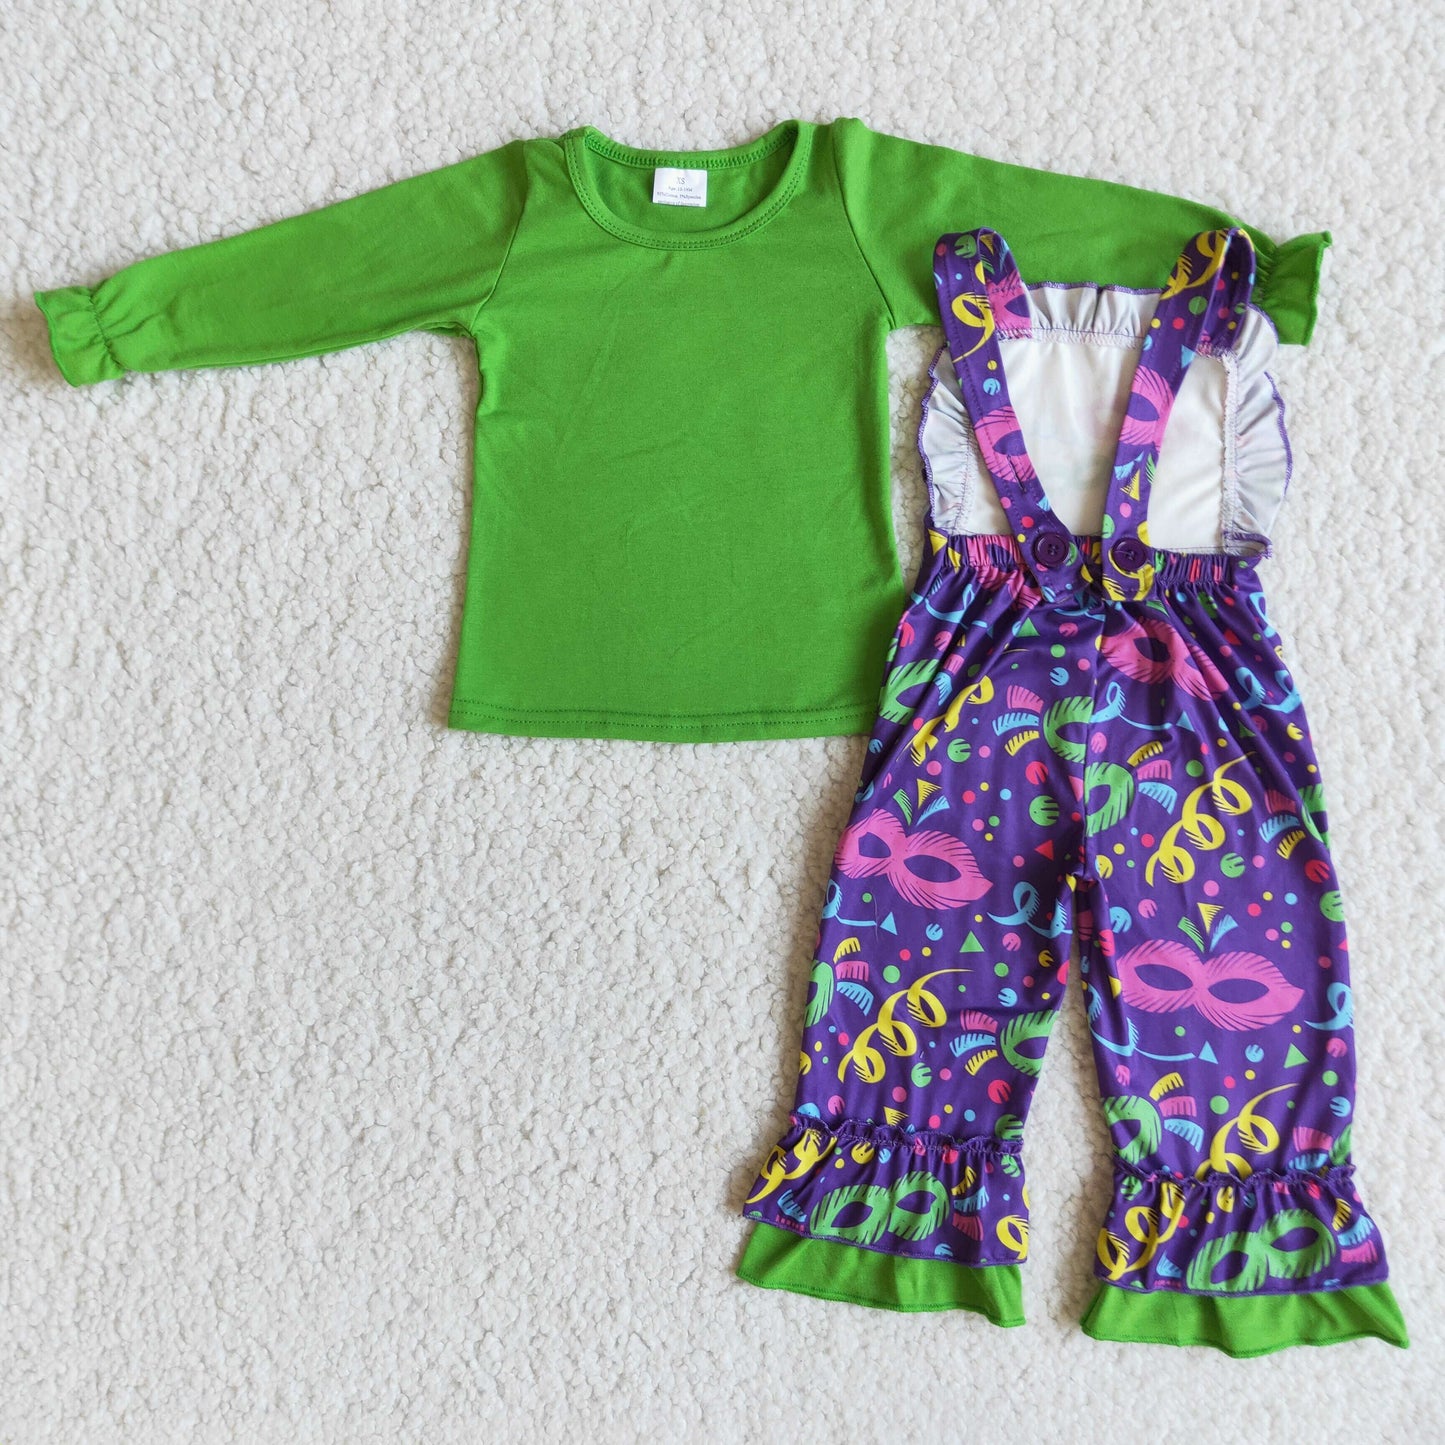 green cotton top mardi overall outfit